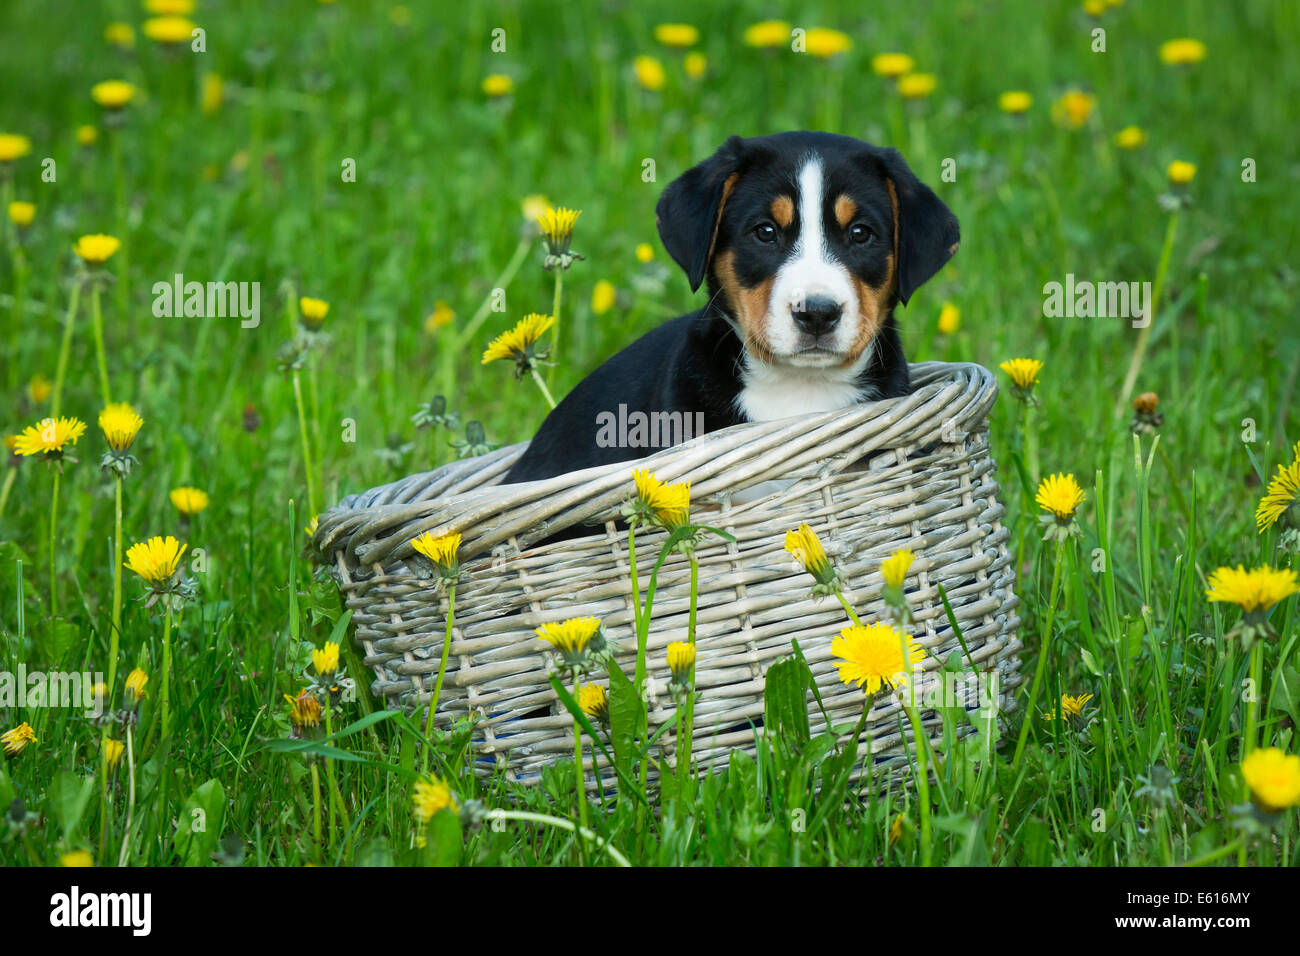 Greater Swiss Mountain Dog, puppy in a basket on a meadow, Bavaria, Germany Stock Photo